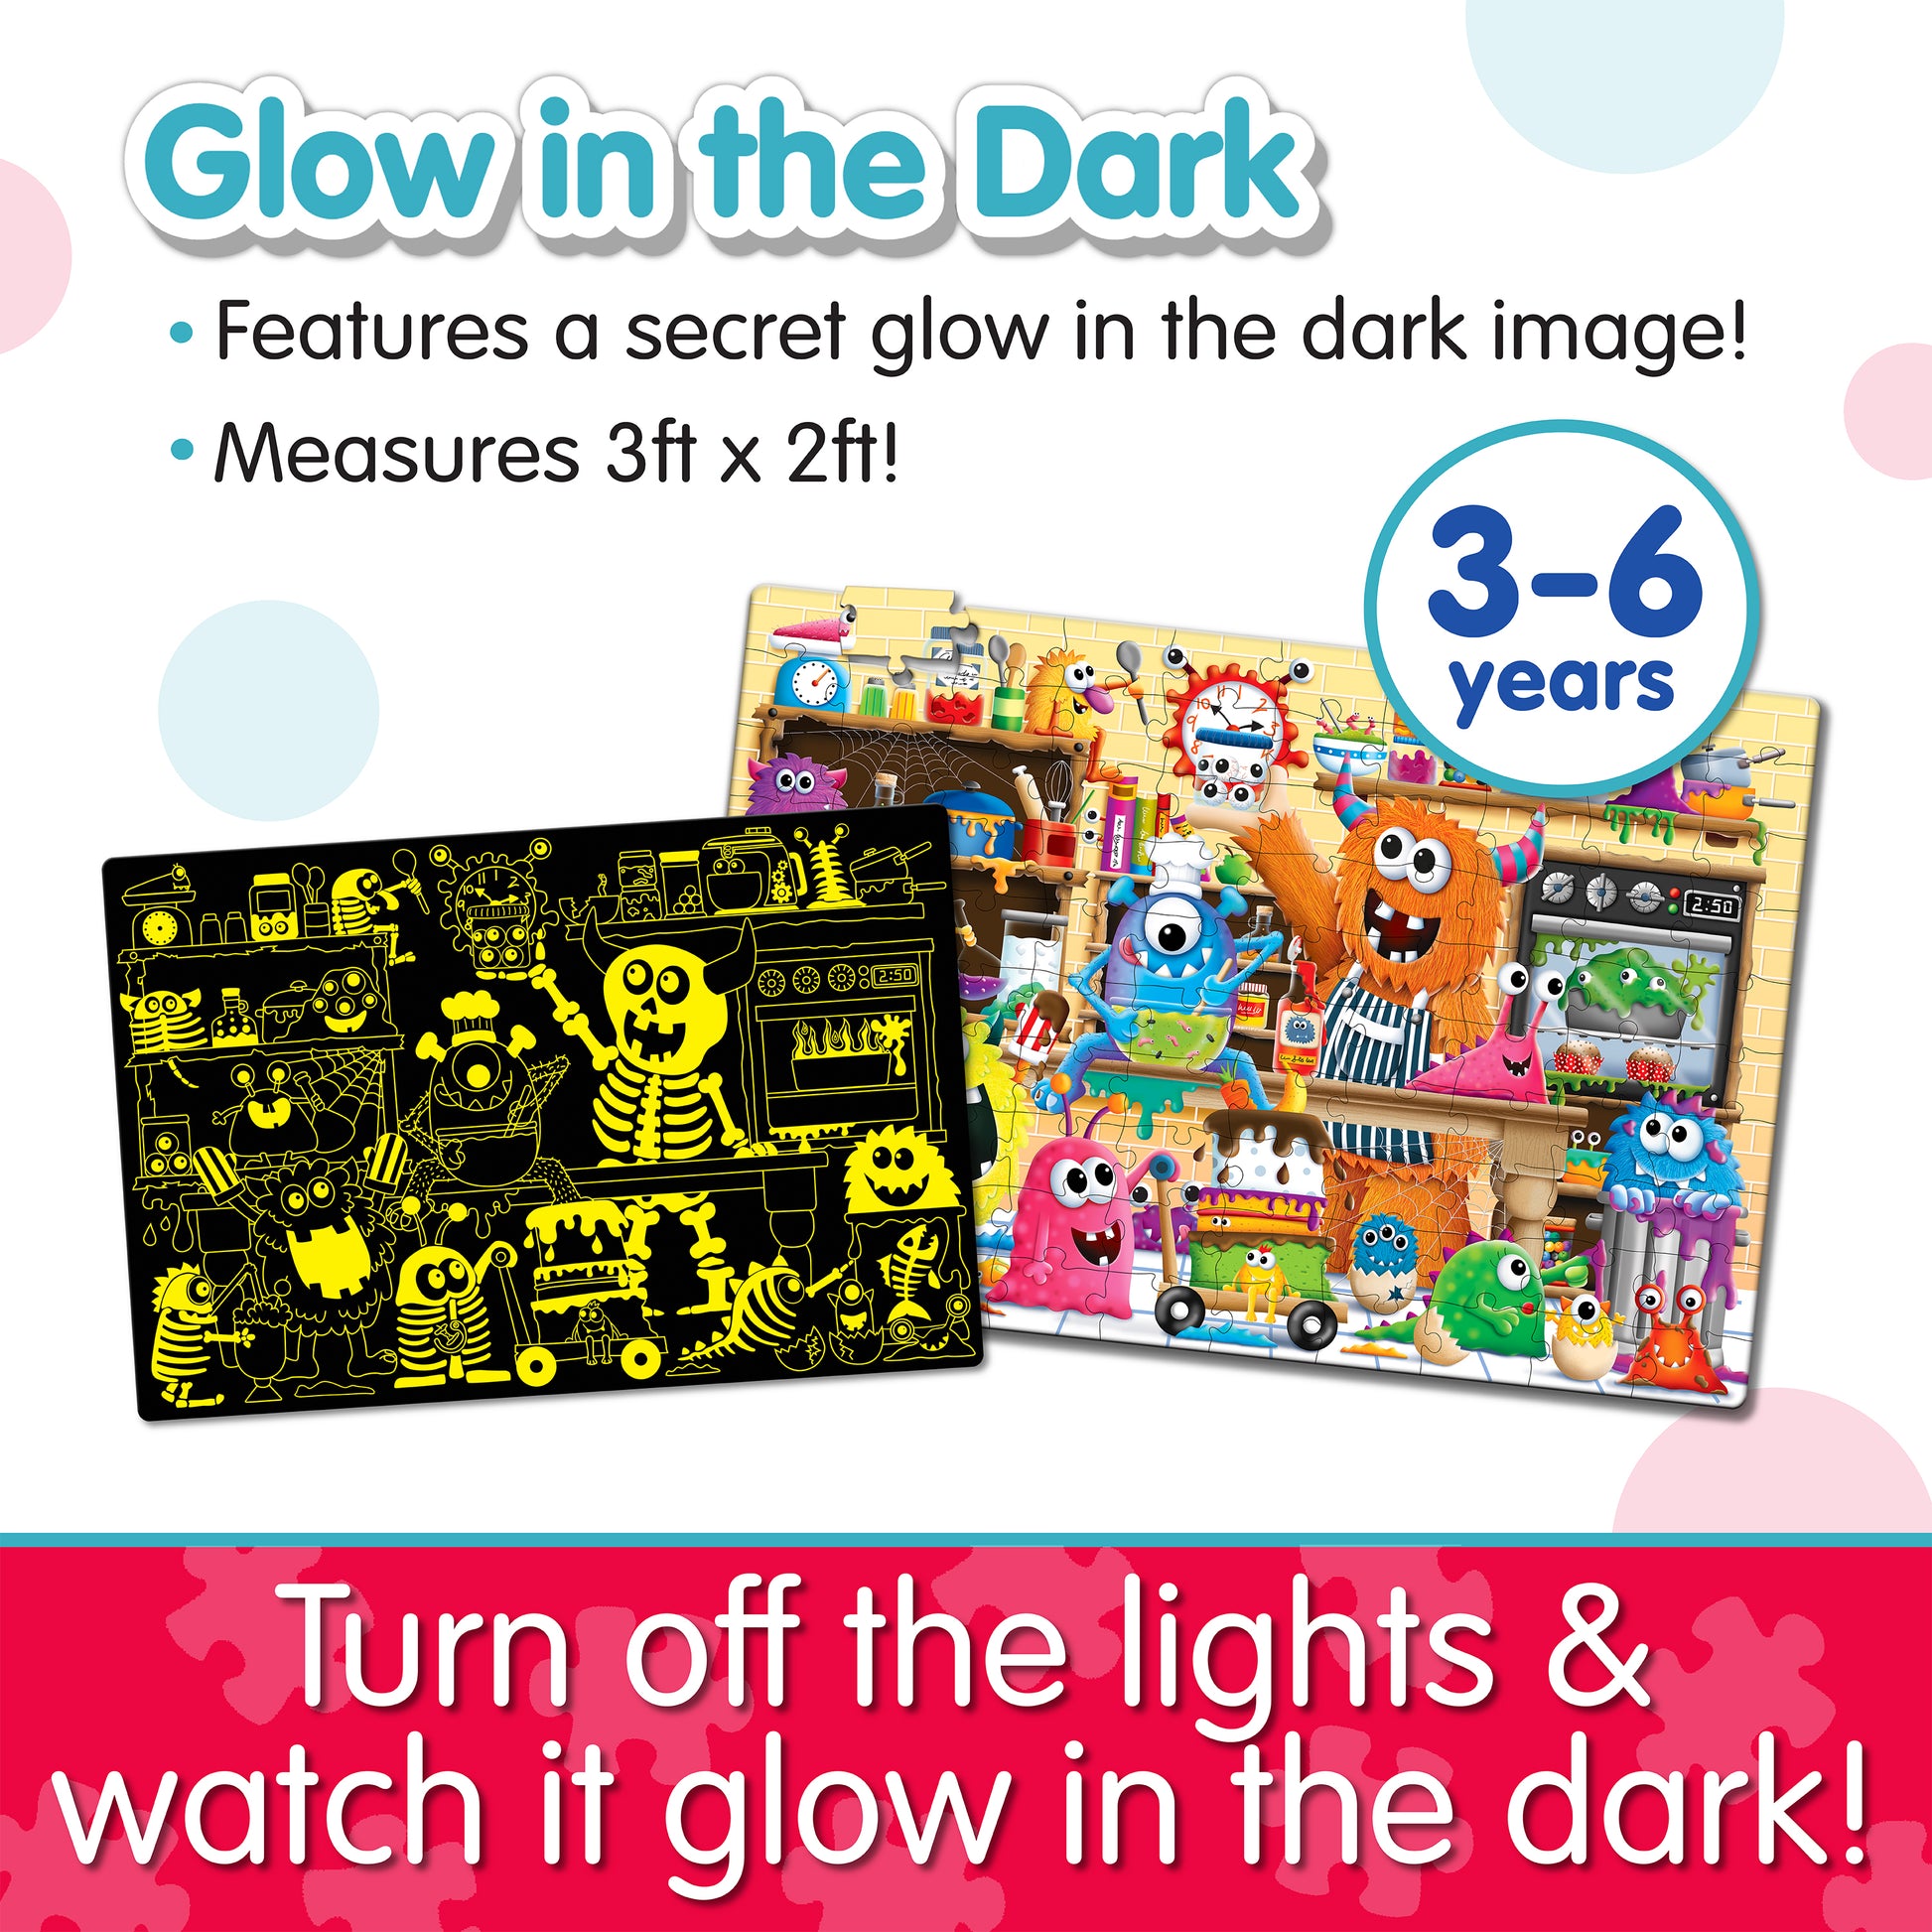 Infographic about Glow in the Dark - Monsters that says, "Turn off the lights and watch it glow in the dark!"